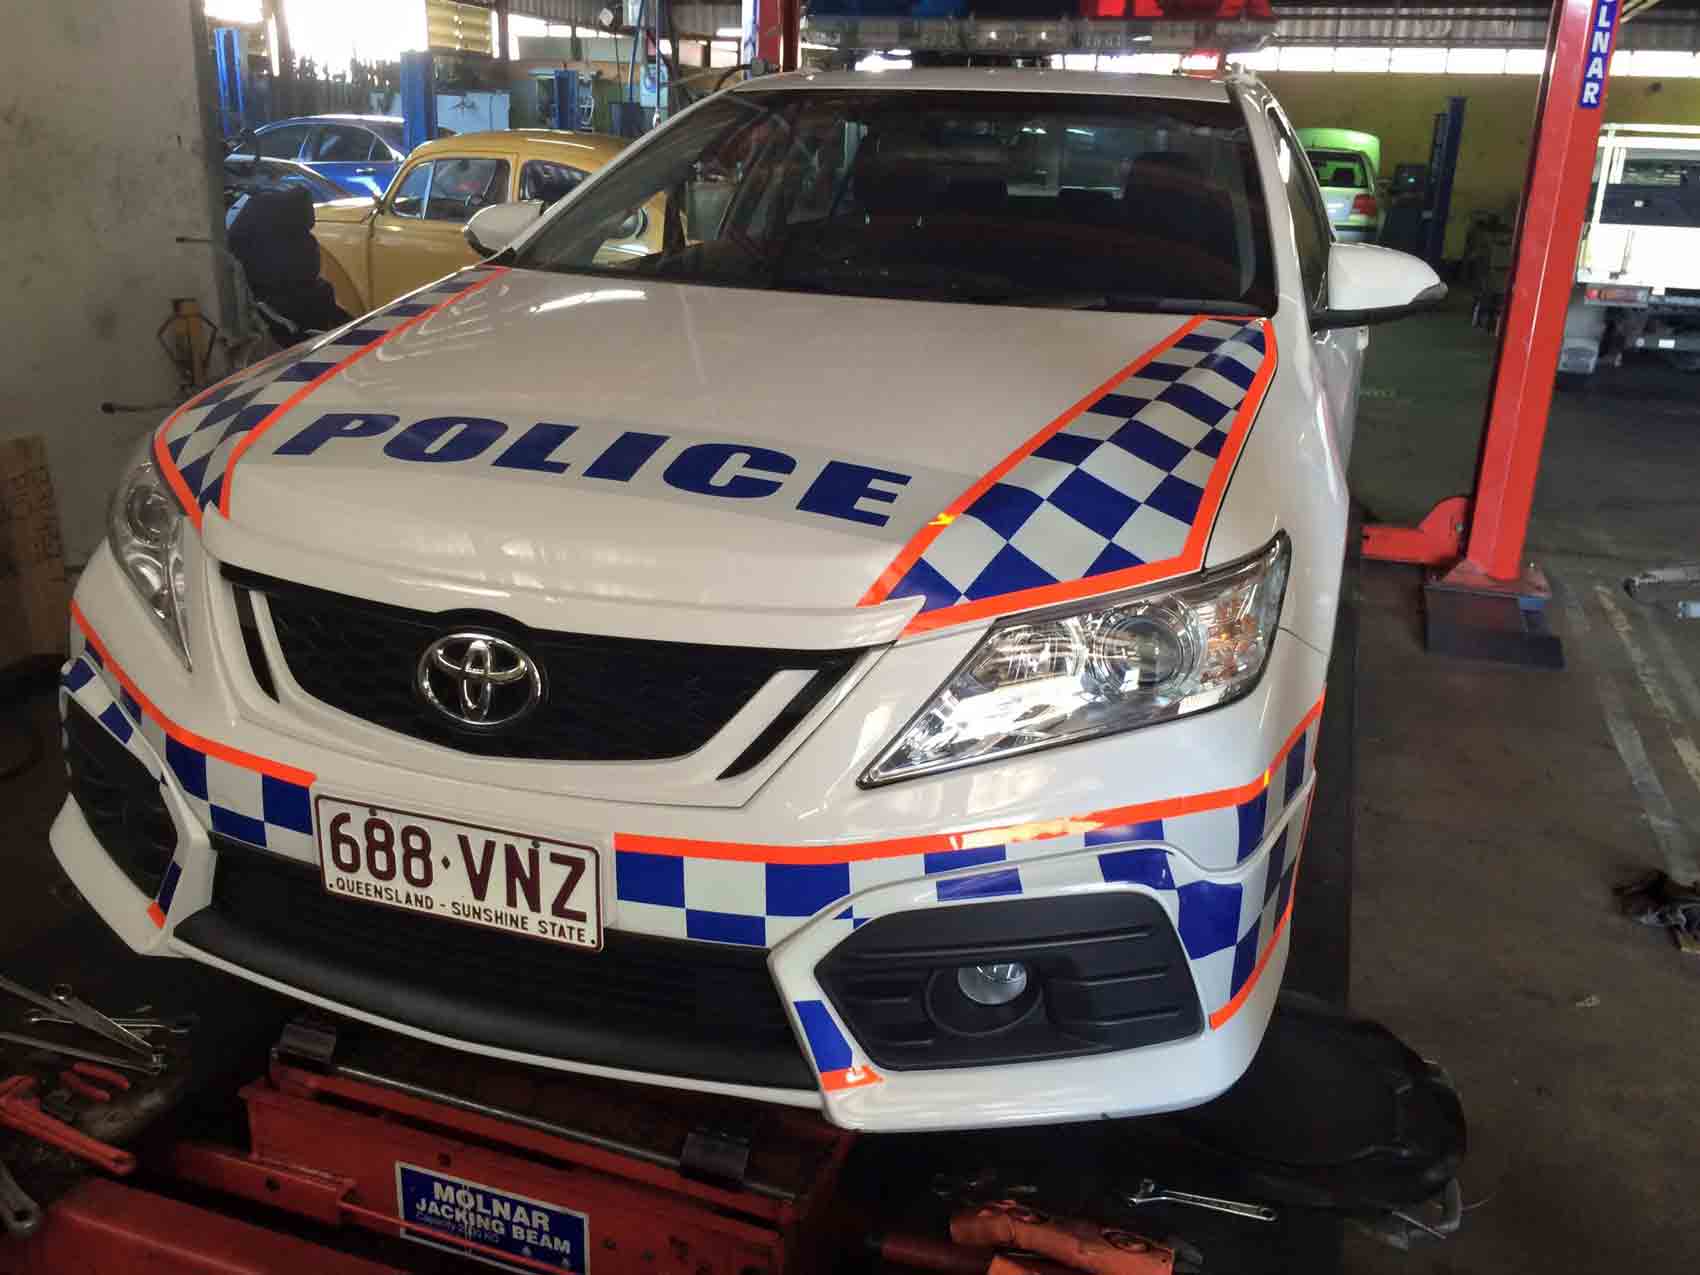 a police car that is white, blue and orange